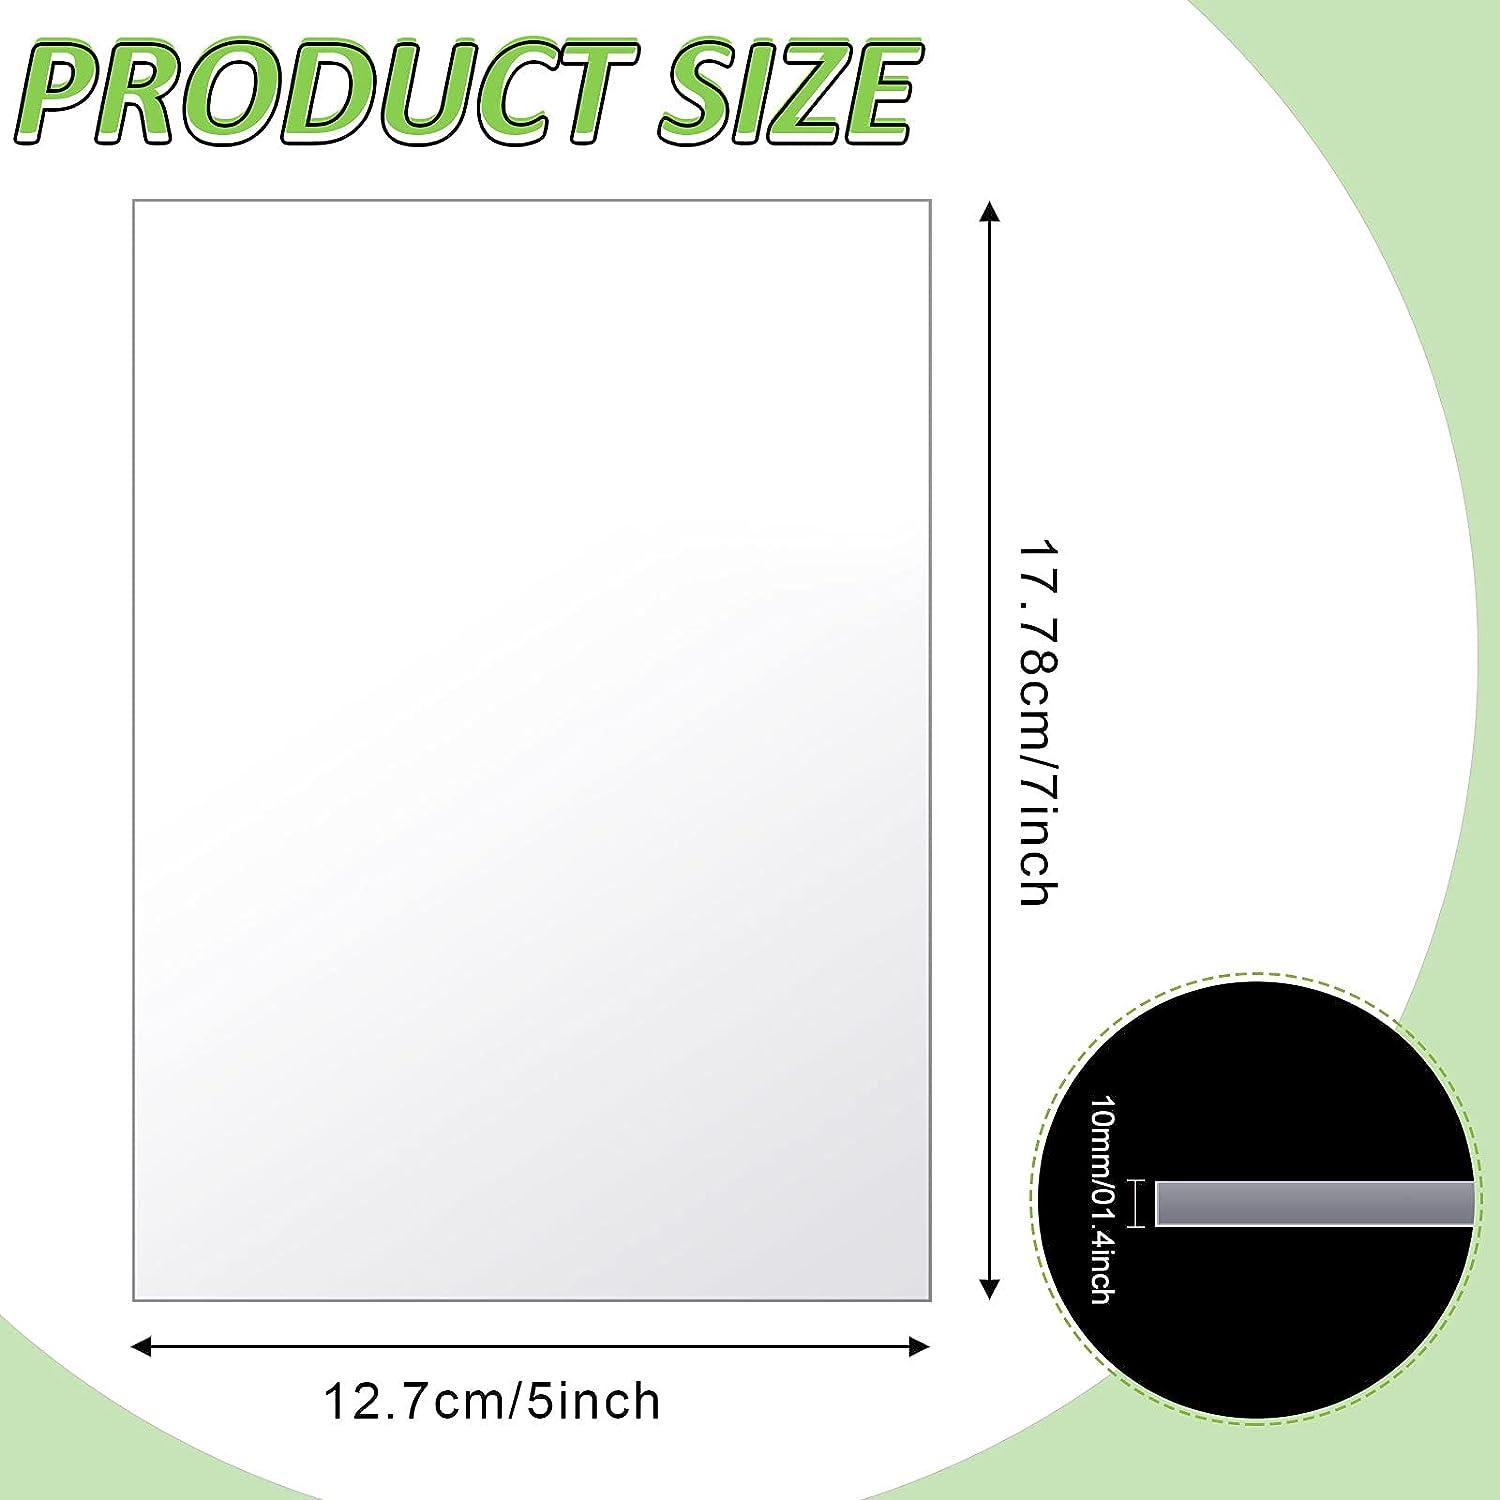 PETG Sheet/Plexiglass Panels Use for Crafting Projects, Picture Frames,  Cricut Cutting and More; Protective Film That Is Safe for Adults and  Children Gag Sheet - China Clear Acrylic Sheet, Pet Sheet Panels